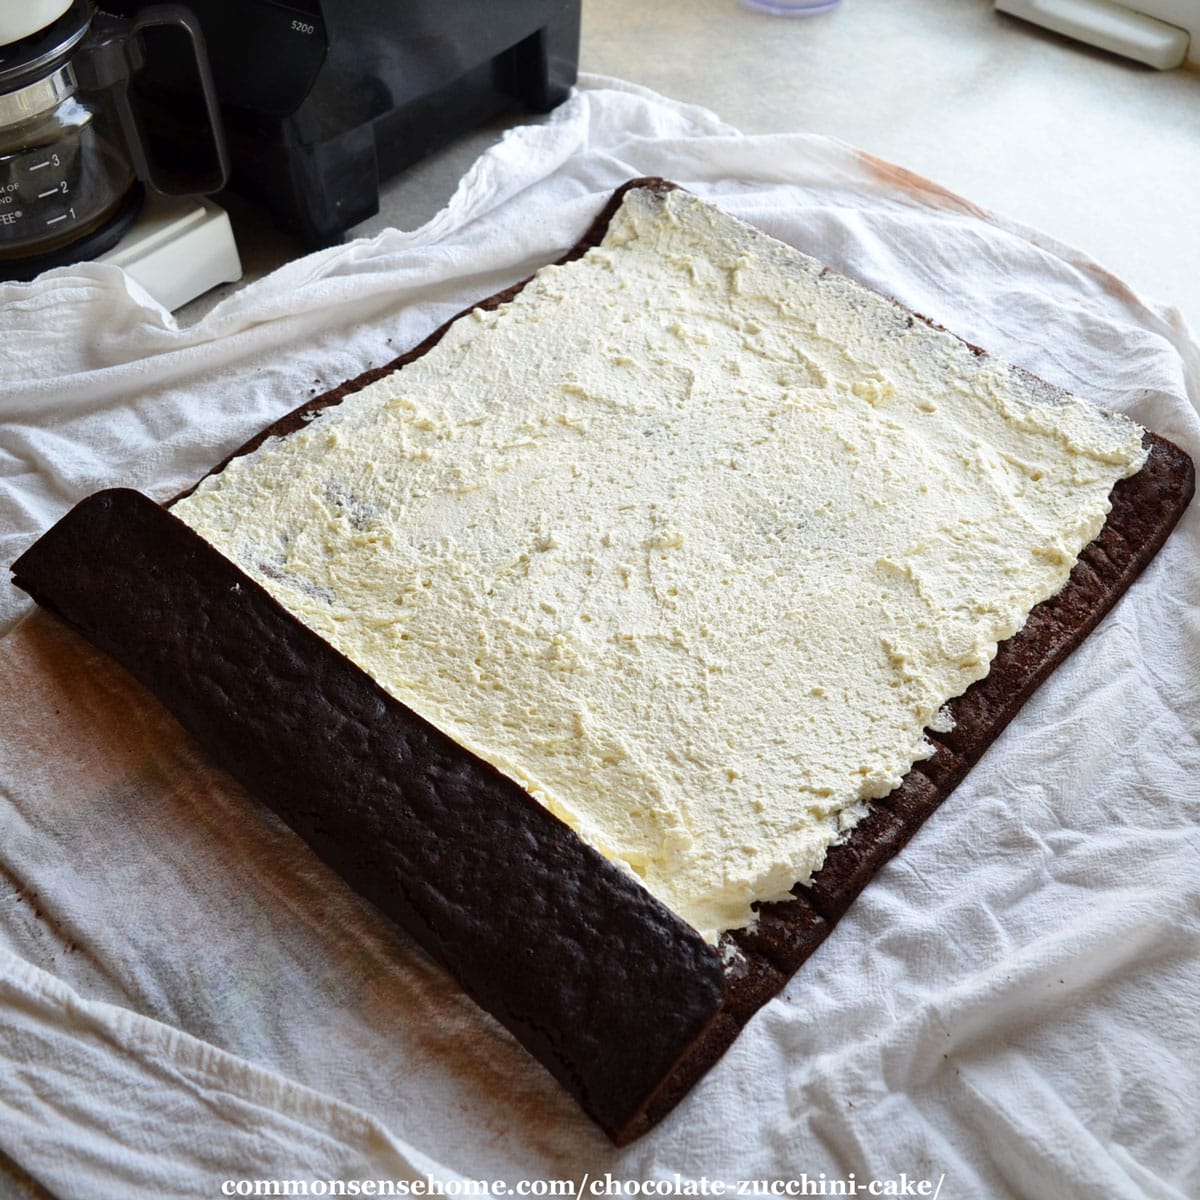 filling the chocolate zucchini cake with sweetened whipped cream